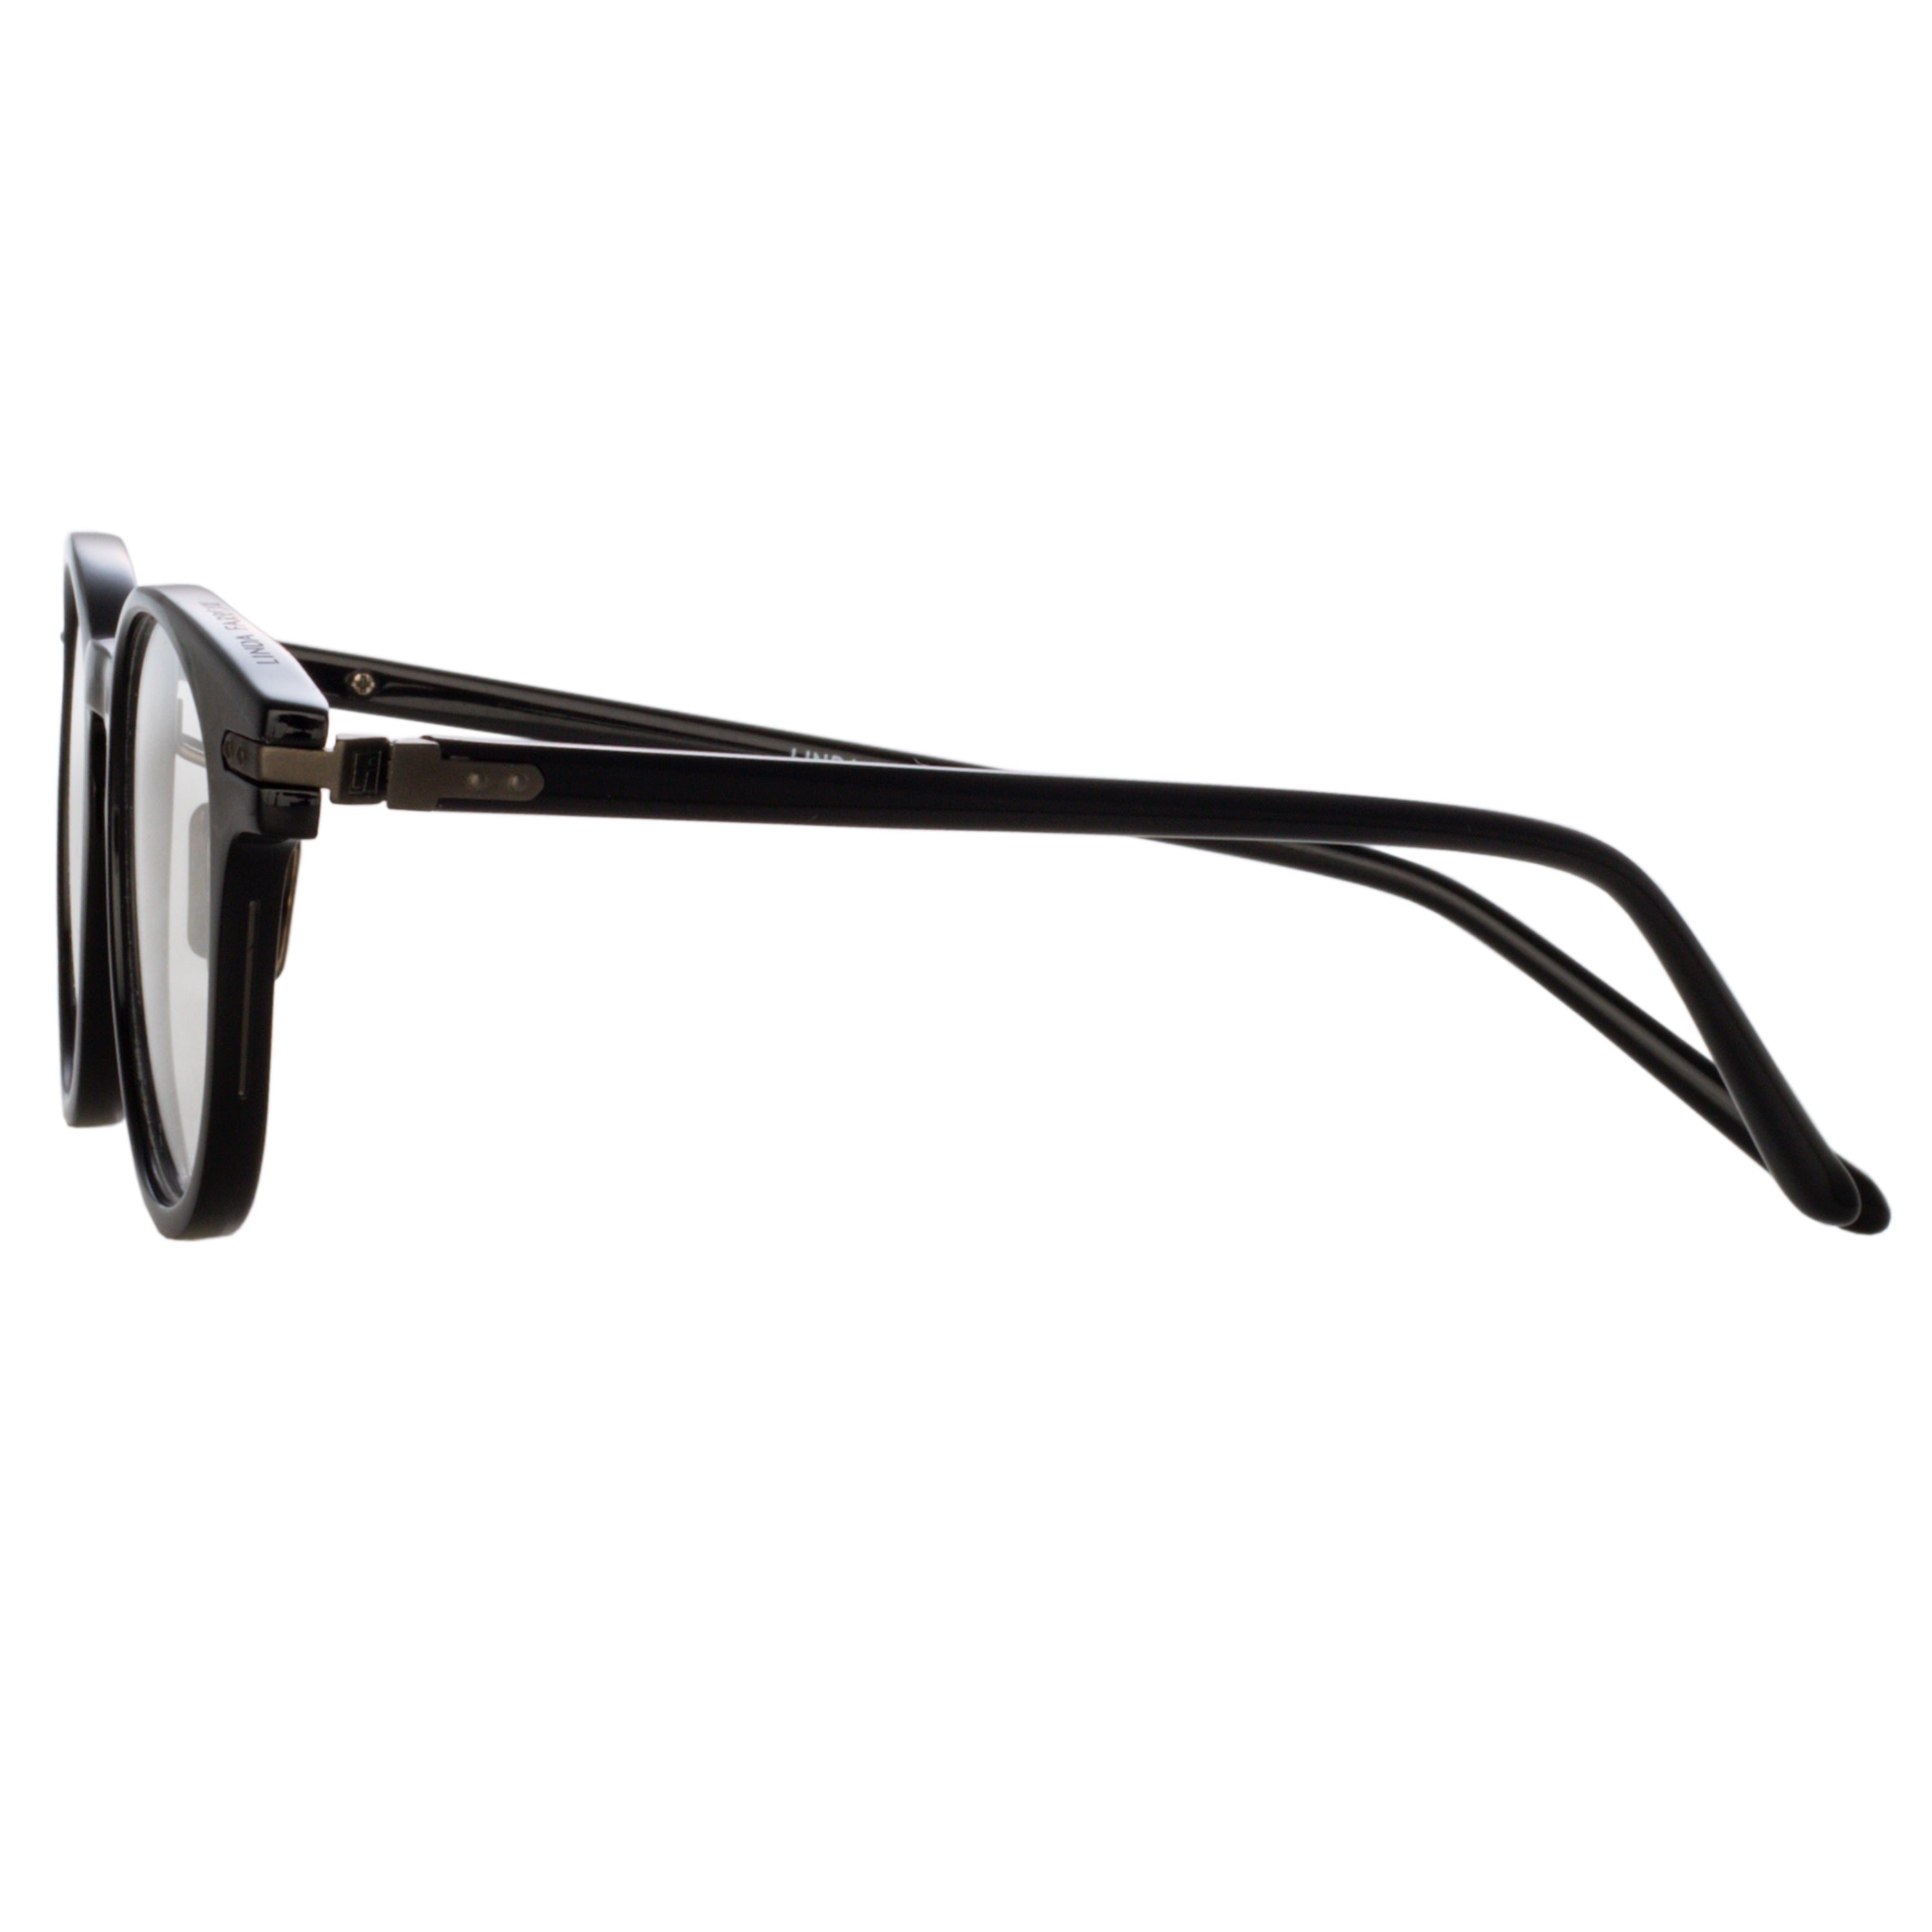 BAY OPTICAL D-FRAME IN BLACK AND NICKEL (ASIAN FIT) - 4